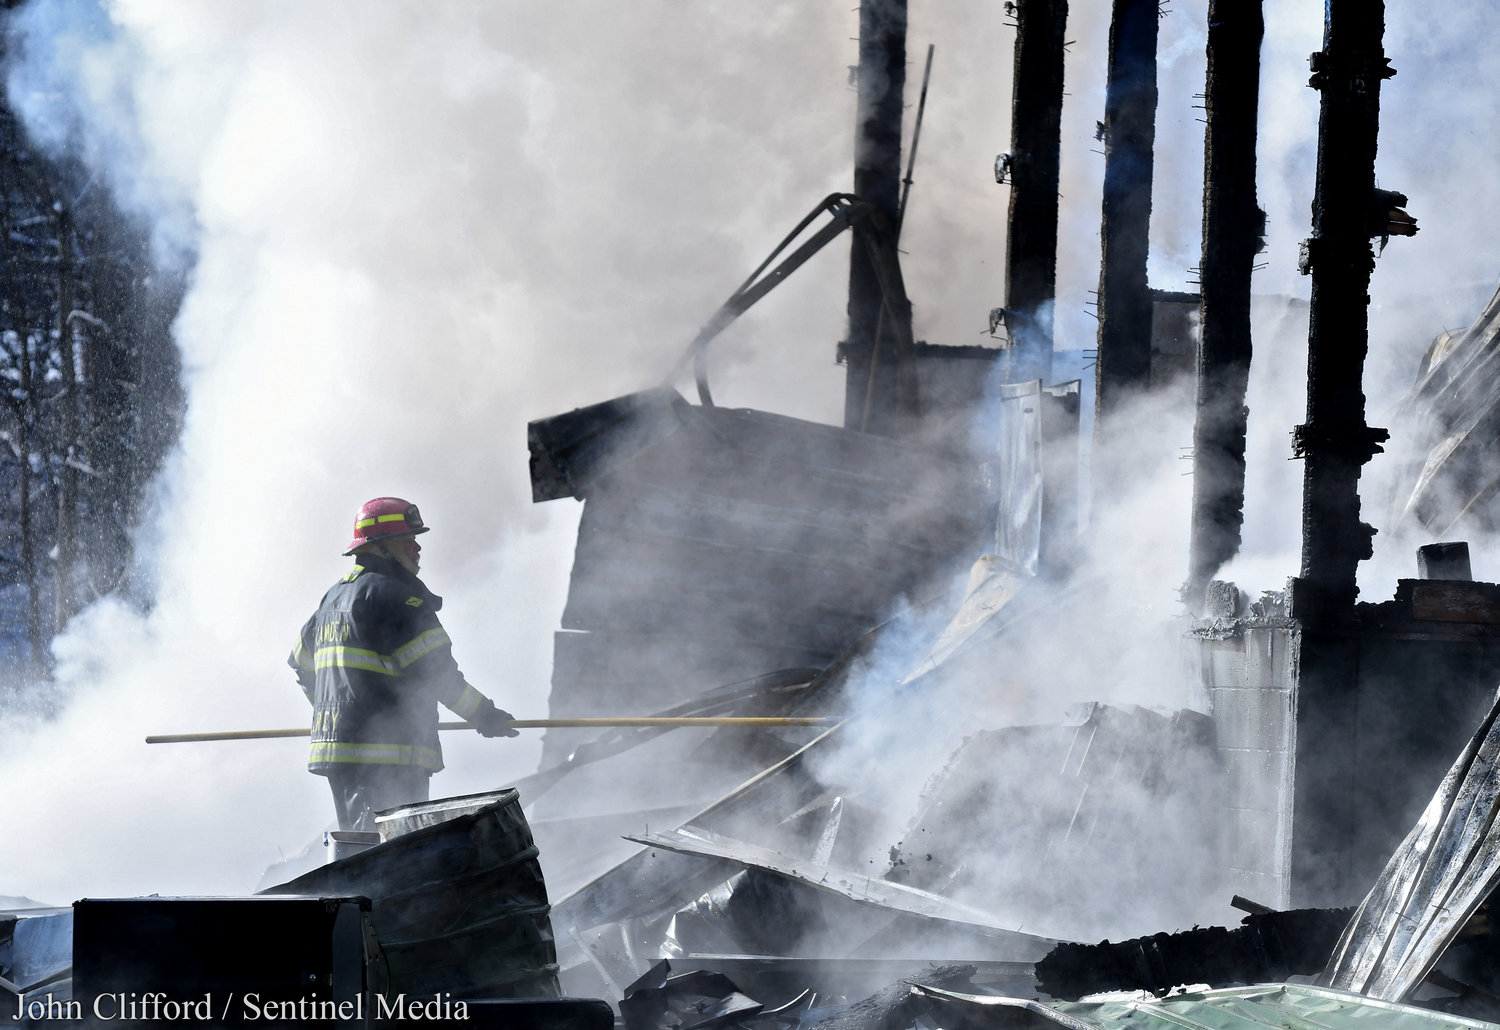 A Camden fireman uses a pike pole to remove debris so water can get to flames. Area firefighters worked a fire at the Village of Camden Department of Public Works building. The building and its contents were an apparent total loss Tuesday, Dec. 13, 2022.